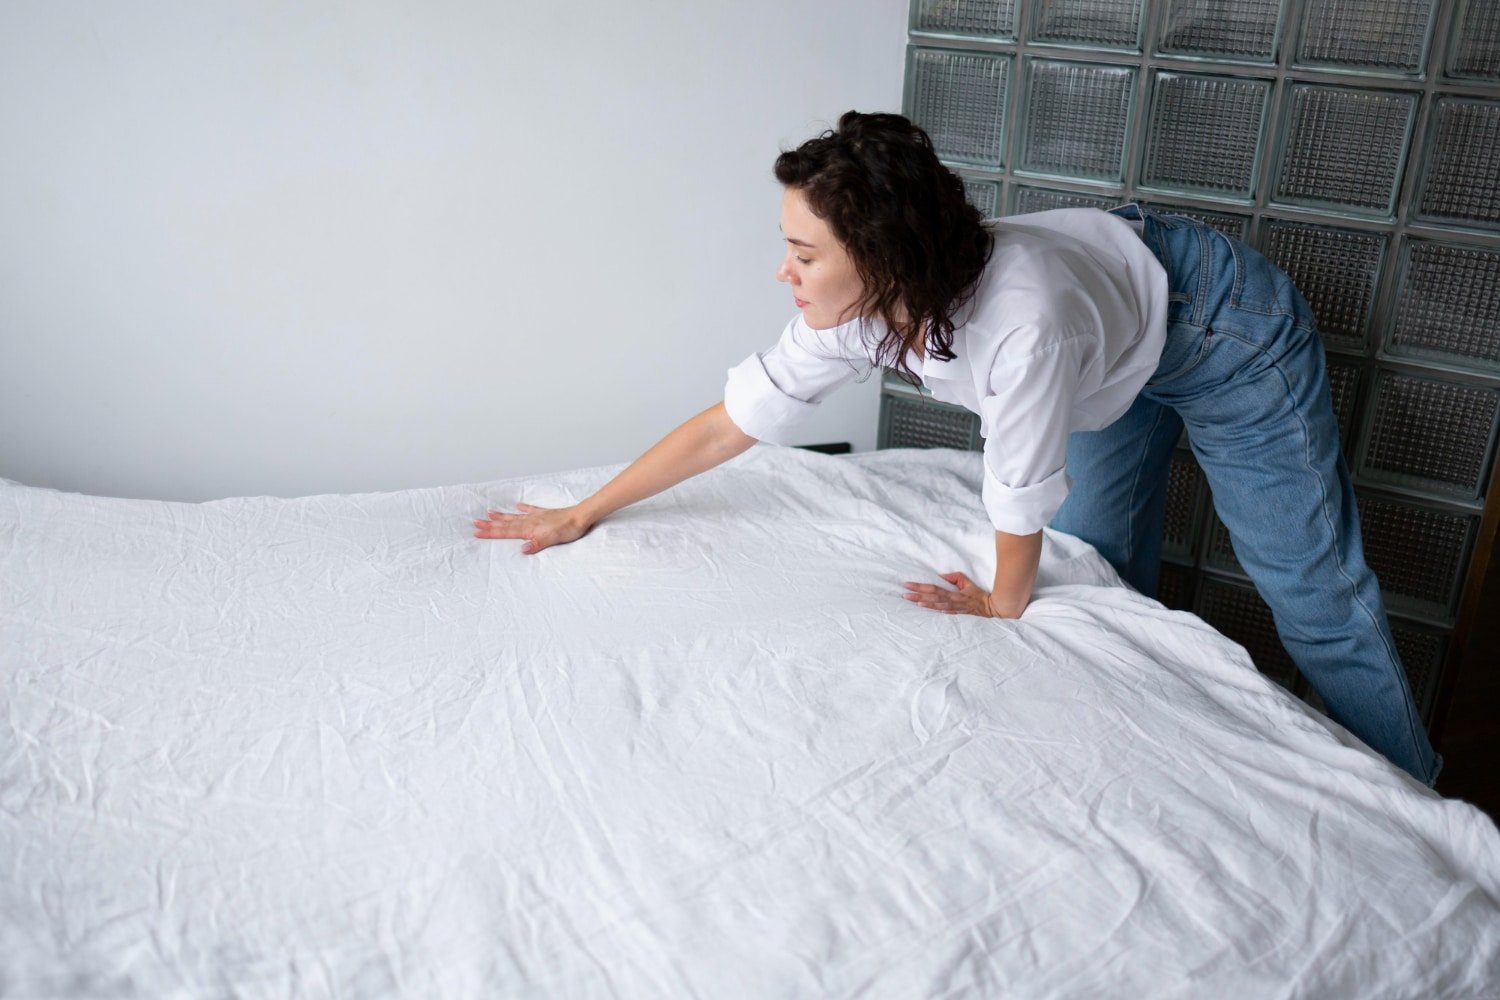 Read more about the article Origin Mattress Australia: The Key to Better Sleep Down Under